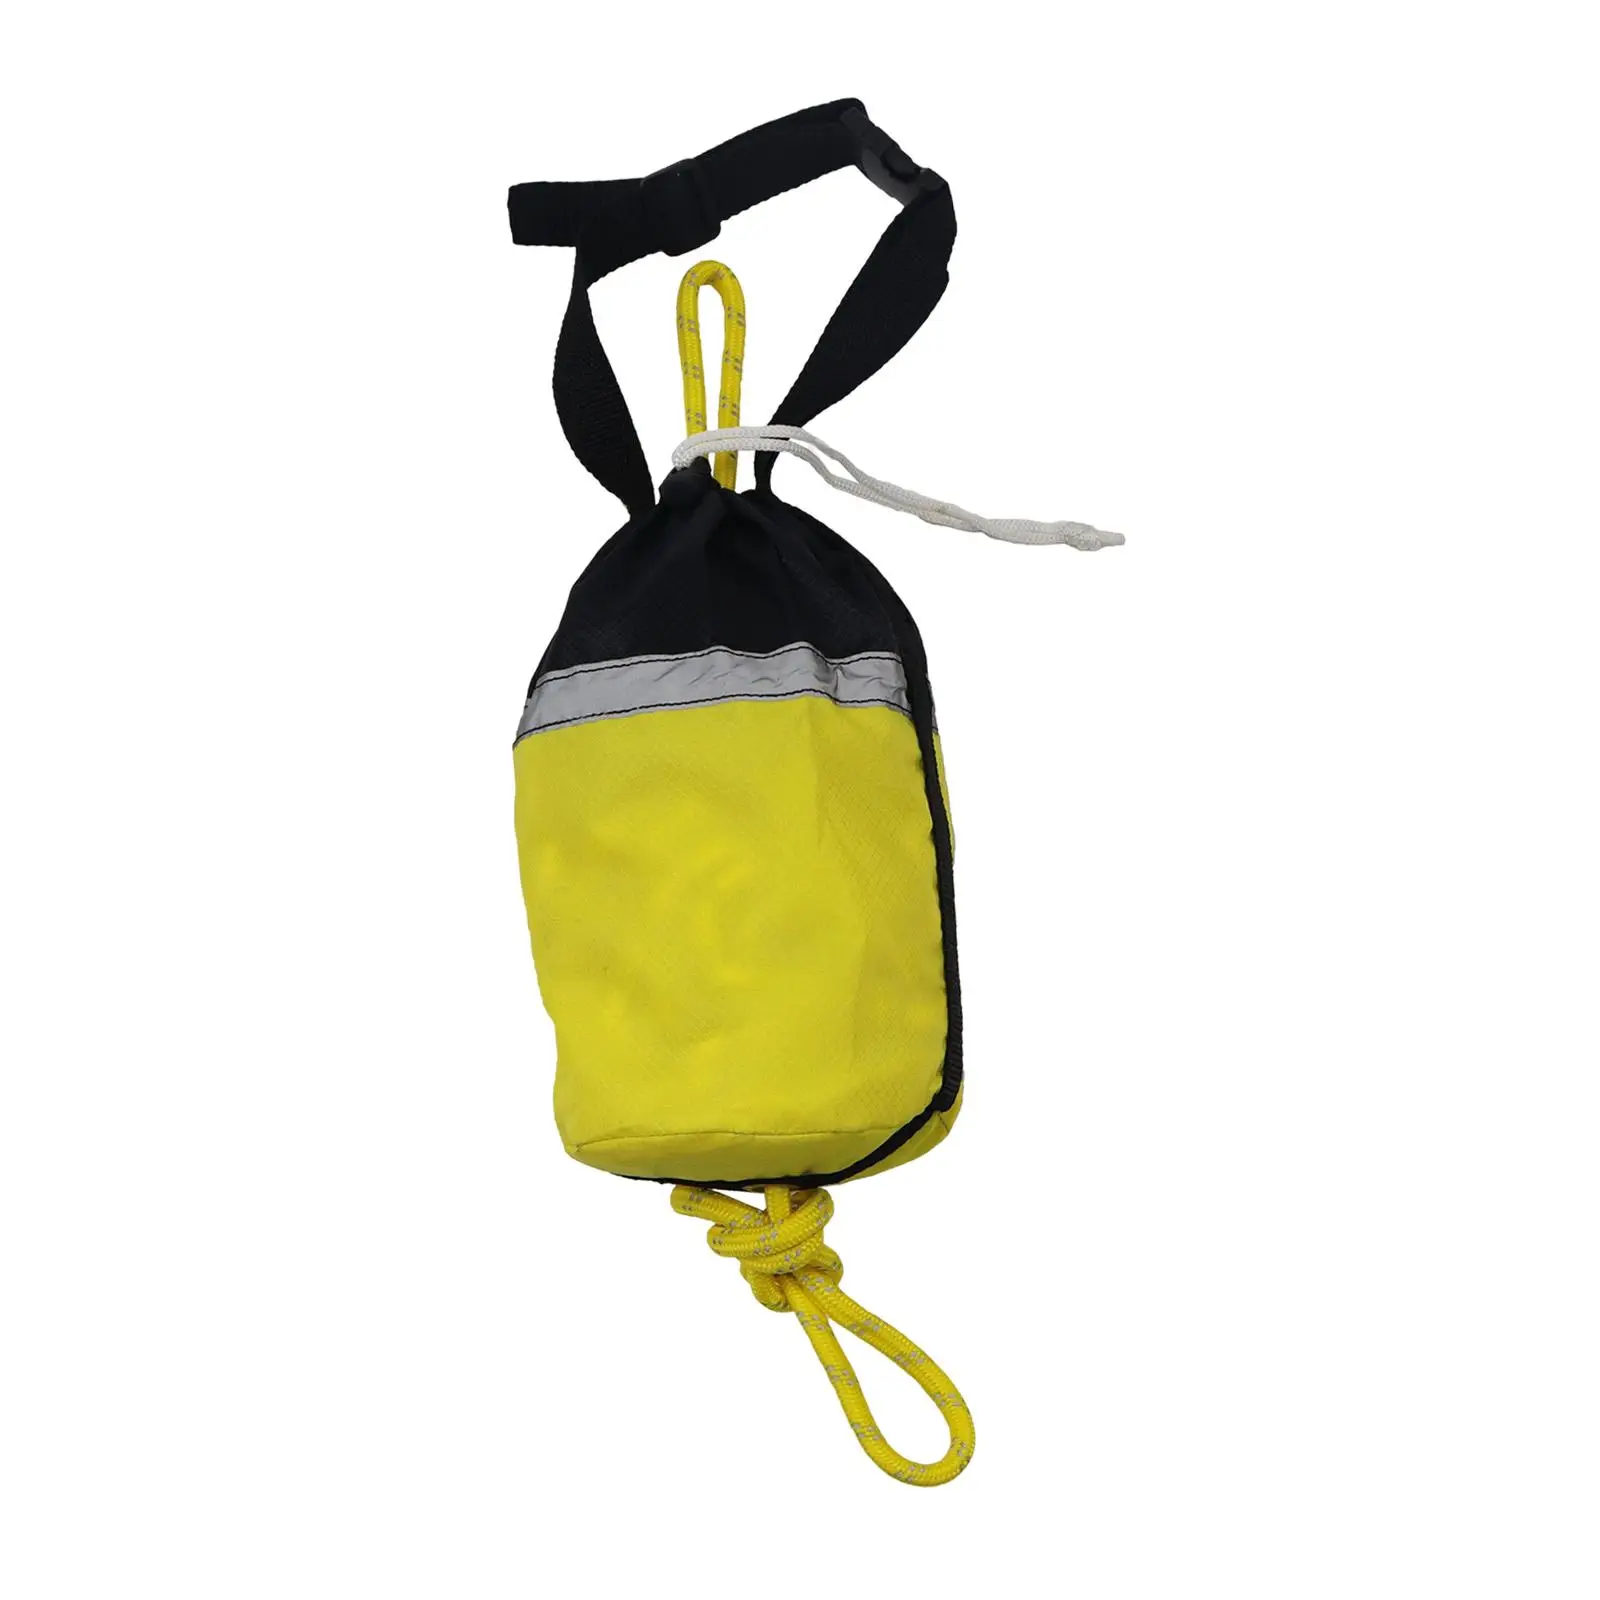 Throw Rope Bag Floating Rescue Ropes Throwing Line Throwable Safety Device for Ice Fishing Emergency Buoyant Dinghy Water Sports